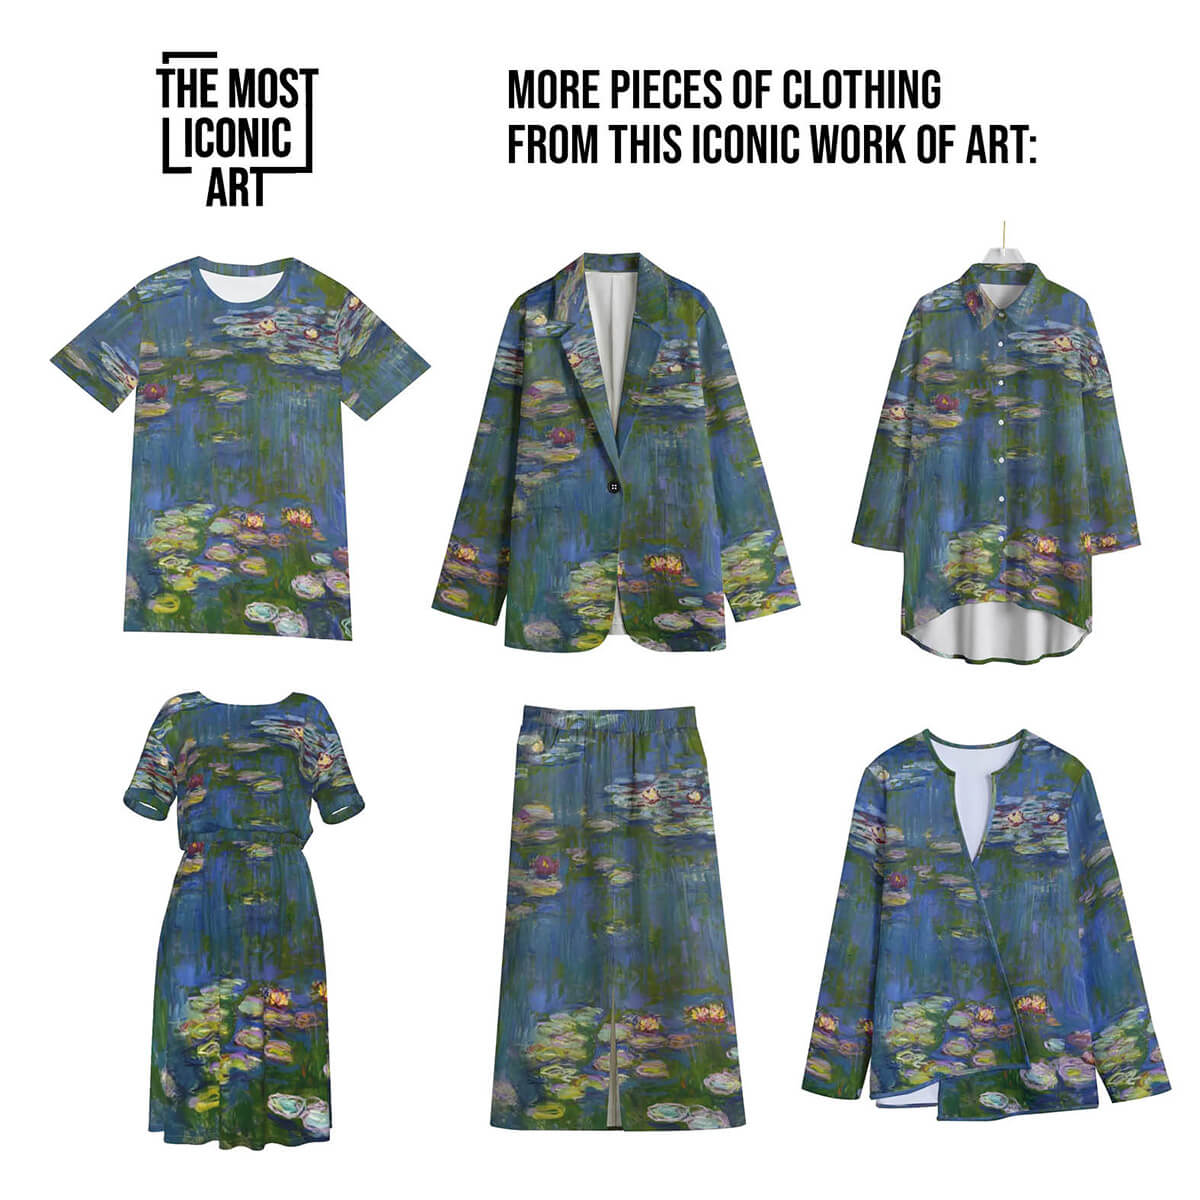 Elegant tank dress inspired by Claude Monet's iconic Water Lilies painting